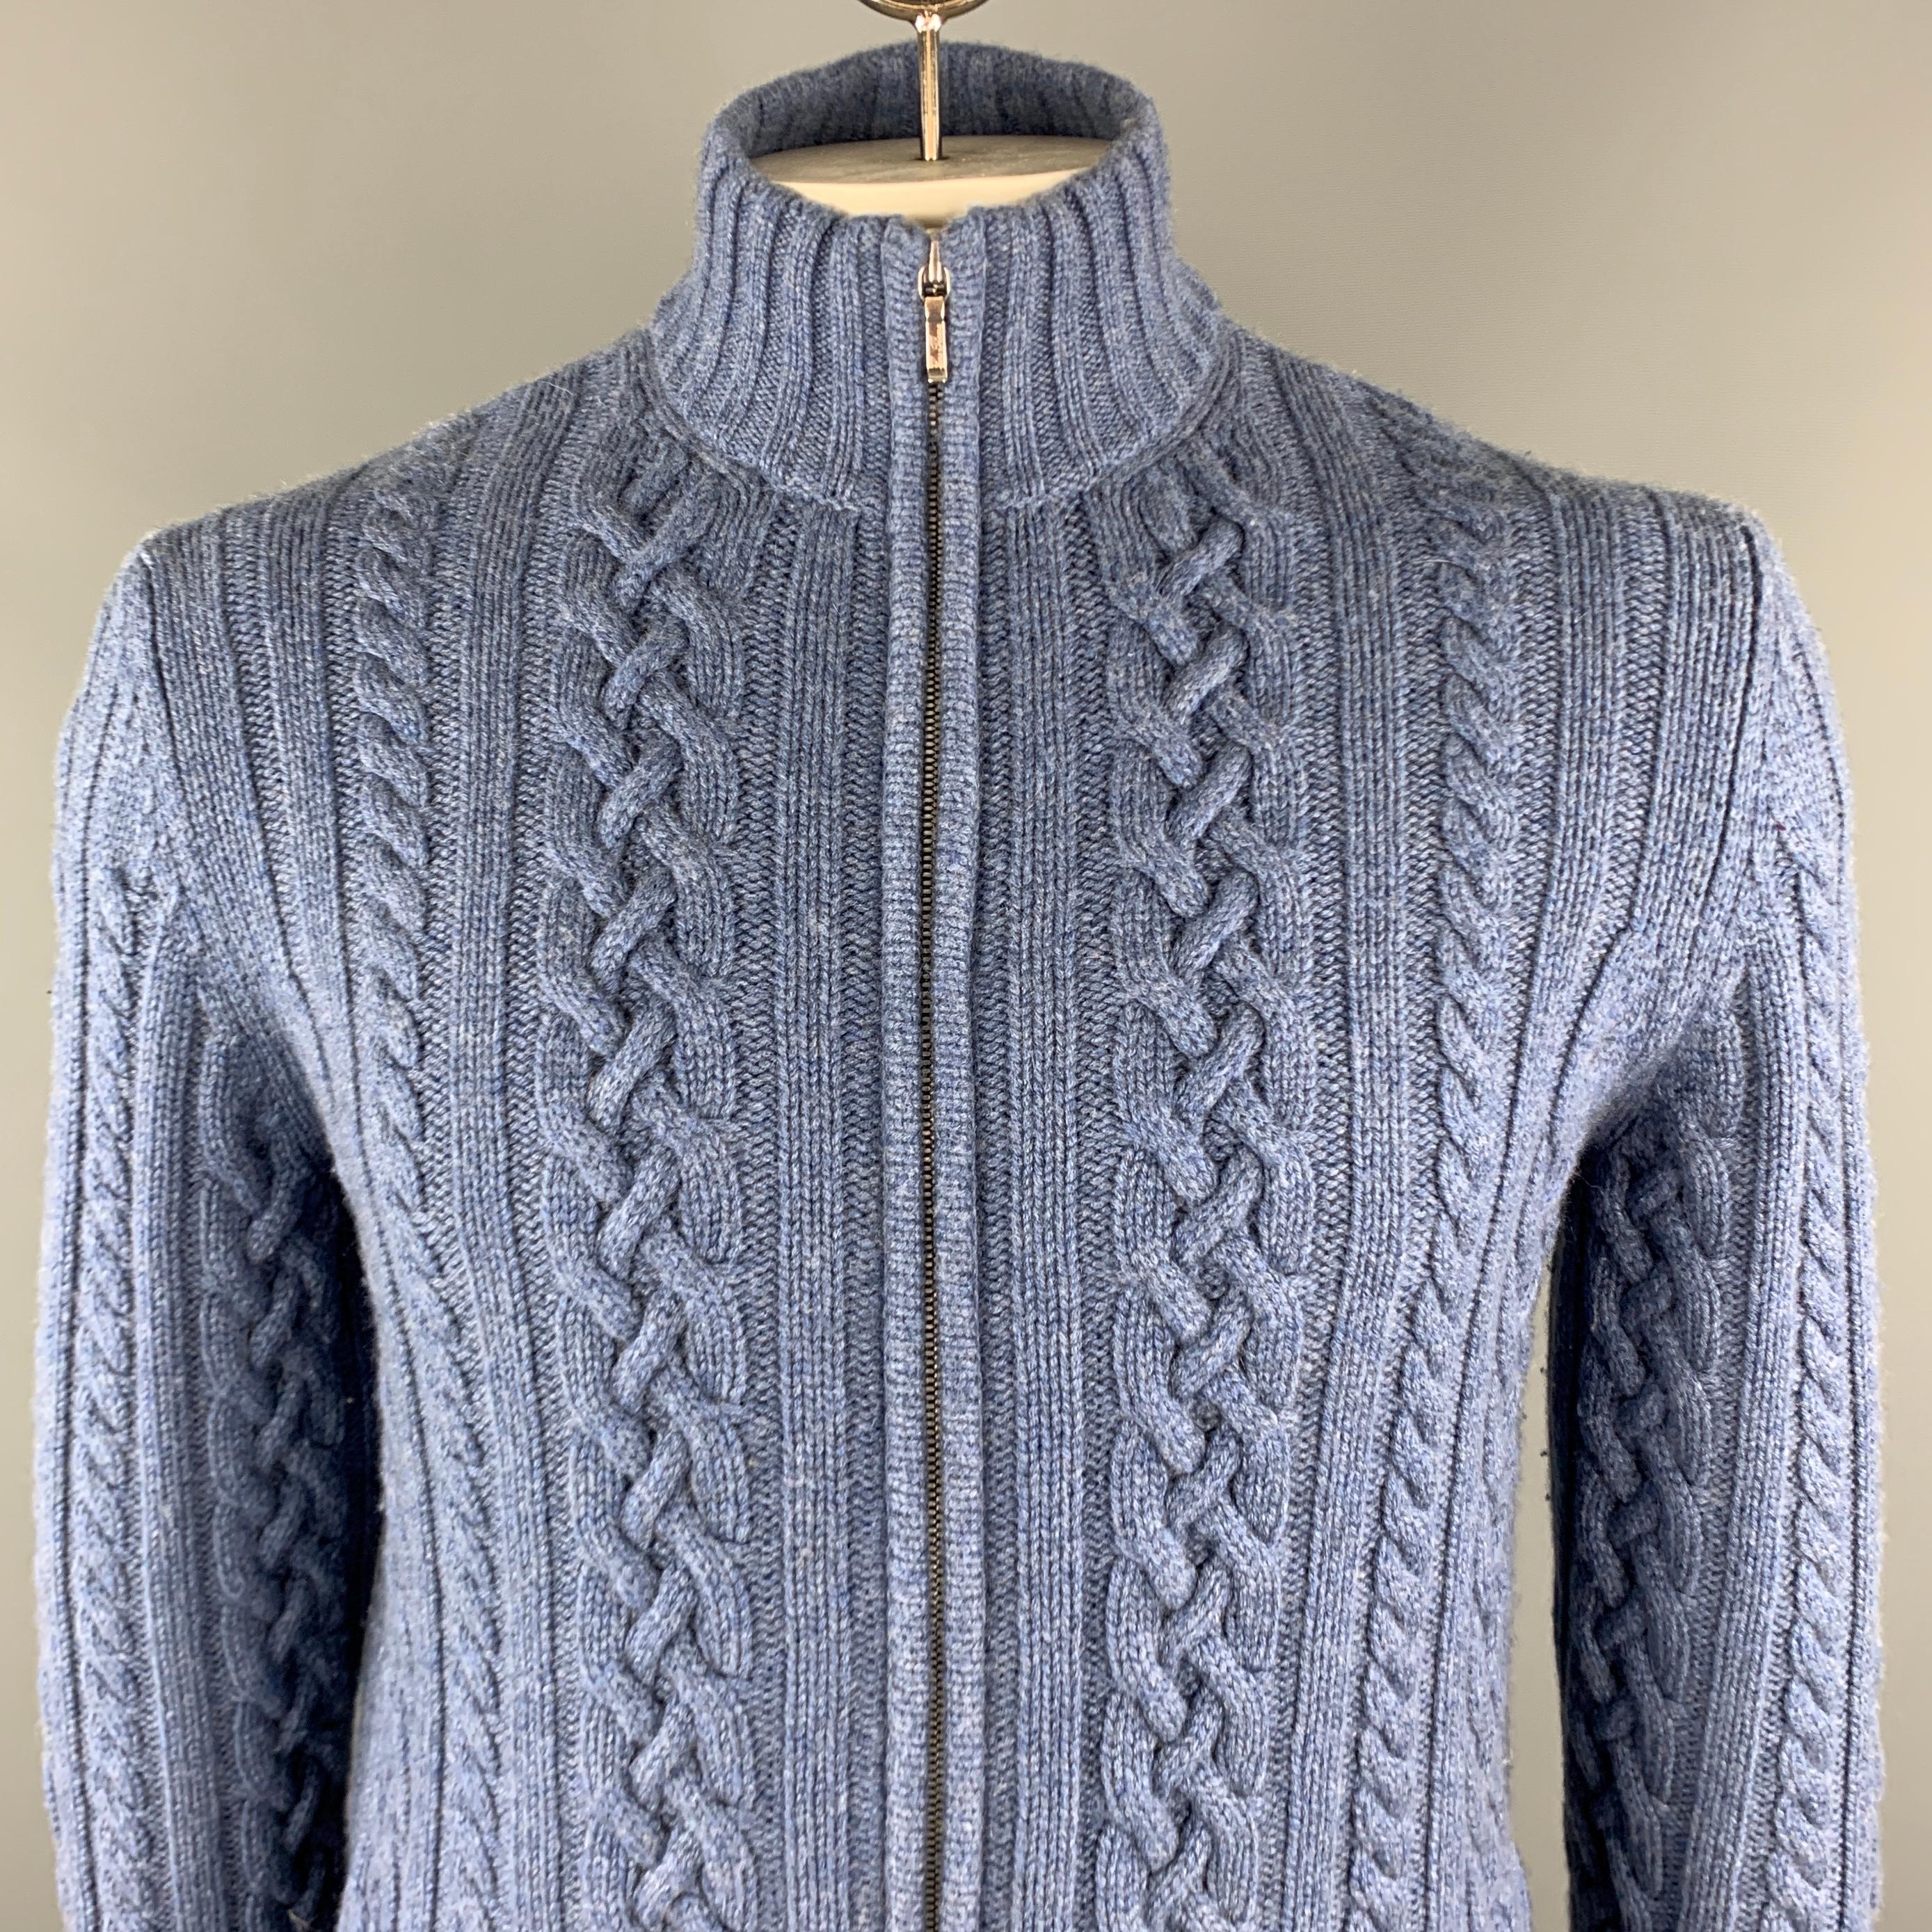 LORO PIANA Cardigan Sweater comes in a blue cable knit cashmere material, with a high collar, zip up, with slit pockets and ribbed collar, cuffs and hem. Made in Italy.


Excellent Pre-Owned Condition.
Marked: IT 52

Measurements:

Shoulder: 16.5